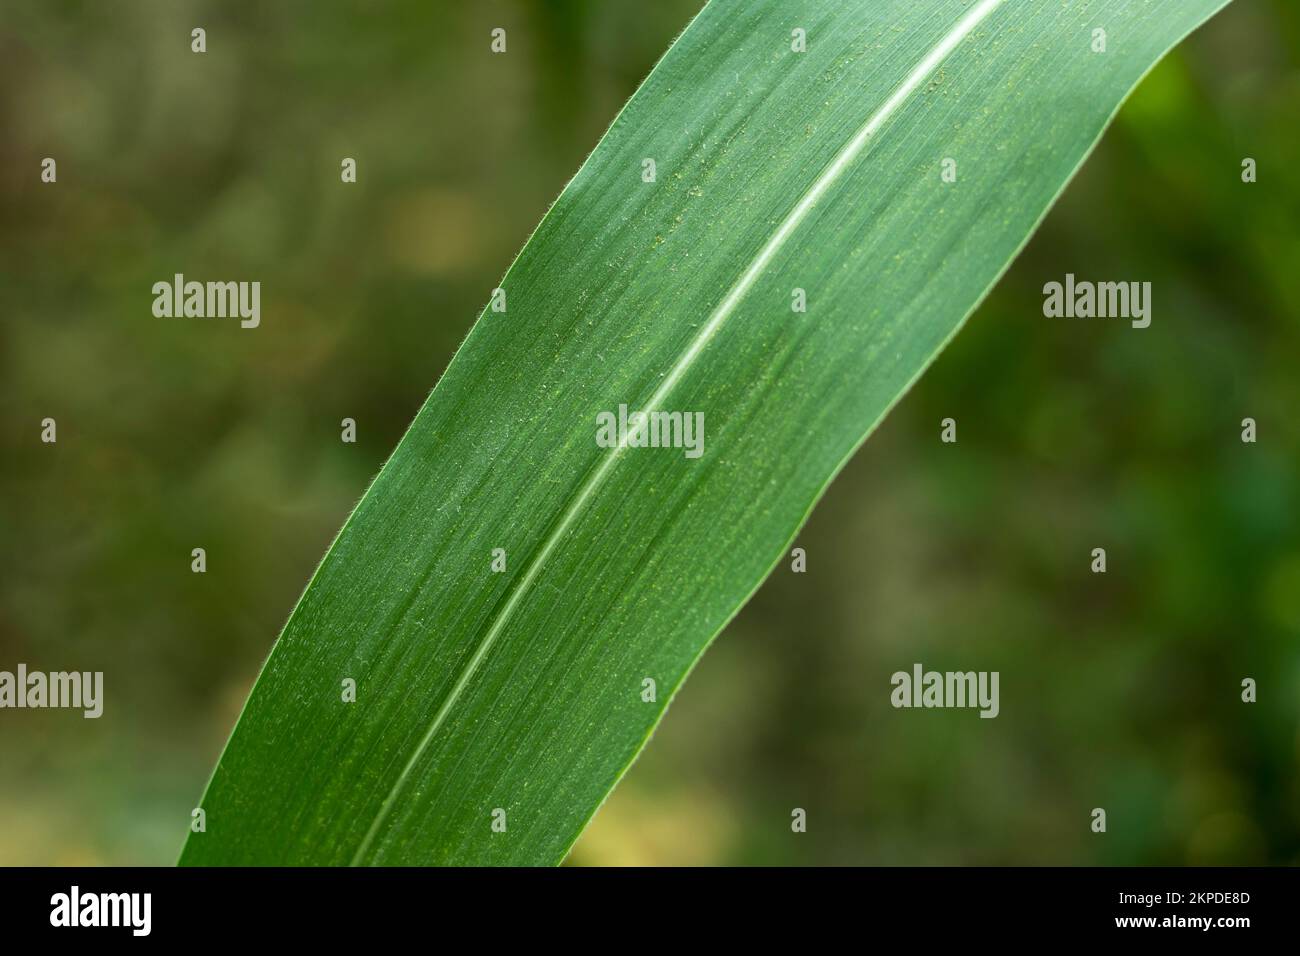 Young corn leaves turn pale yellow or light green. Young corn plant and lush bright green leaves in the home backyard garden. green leaf in close up p Stock Photo